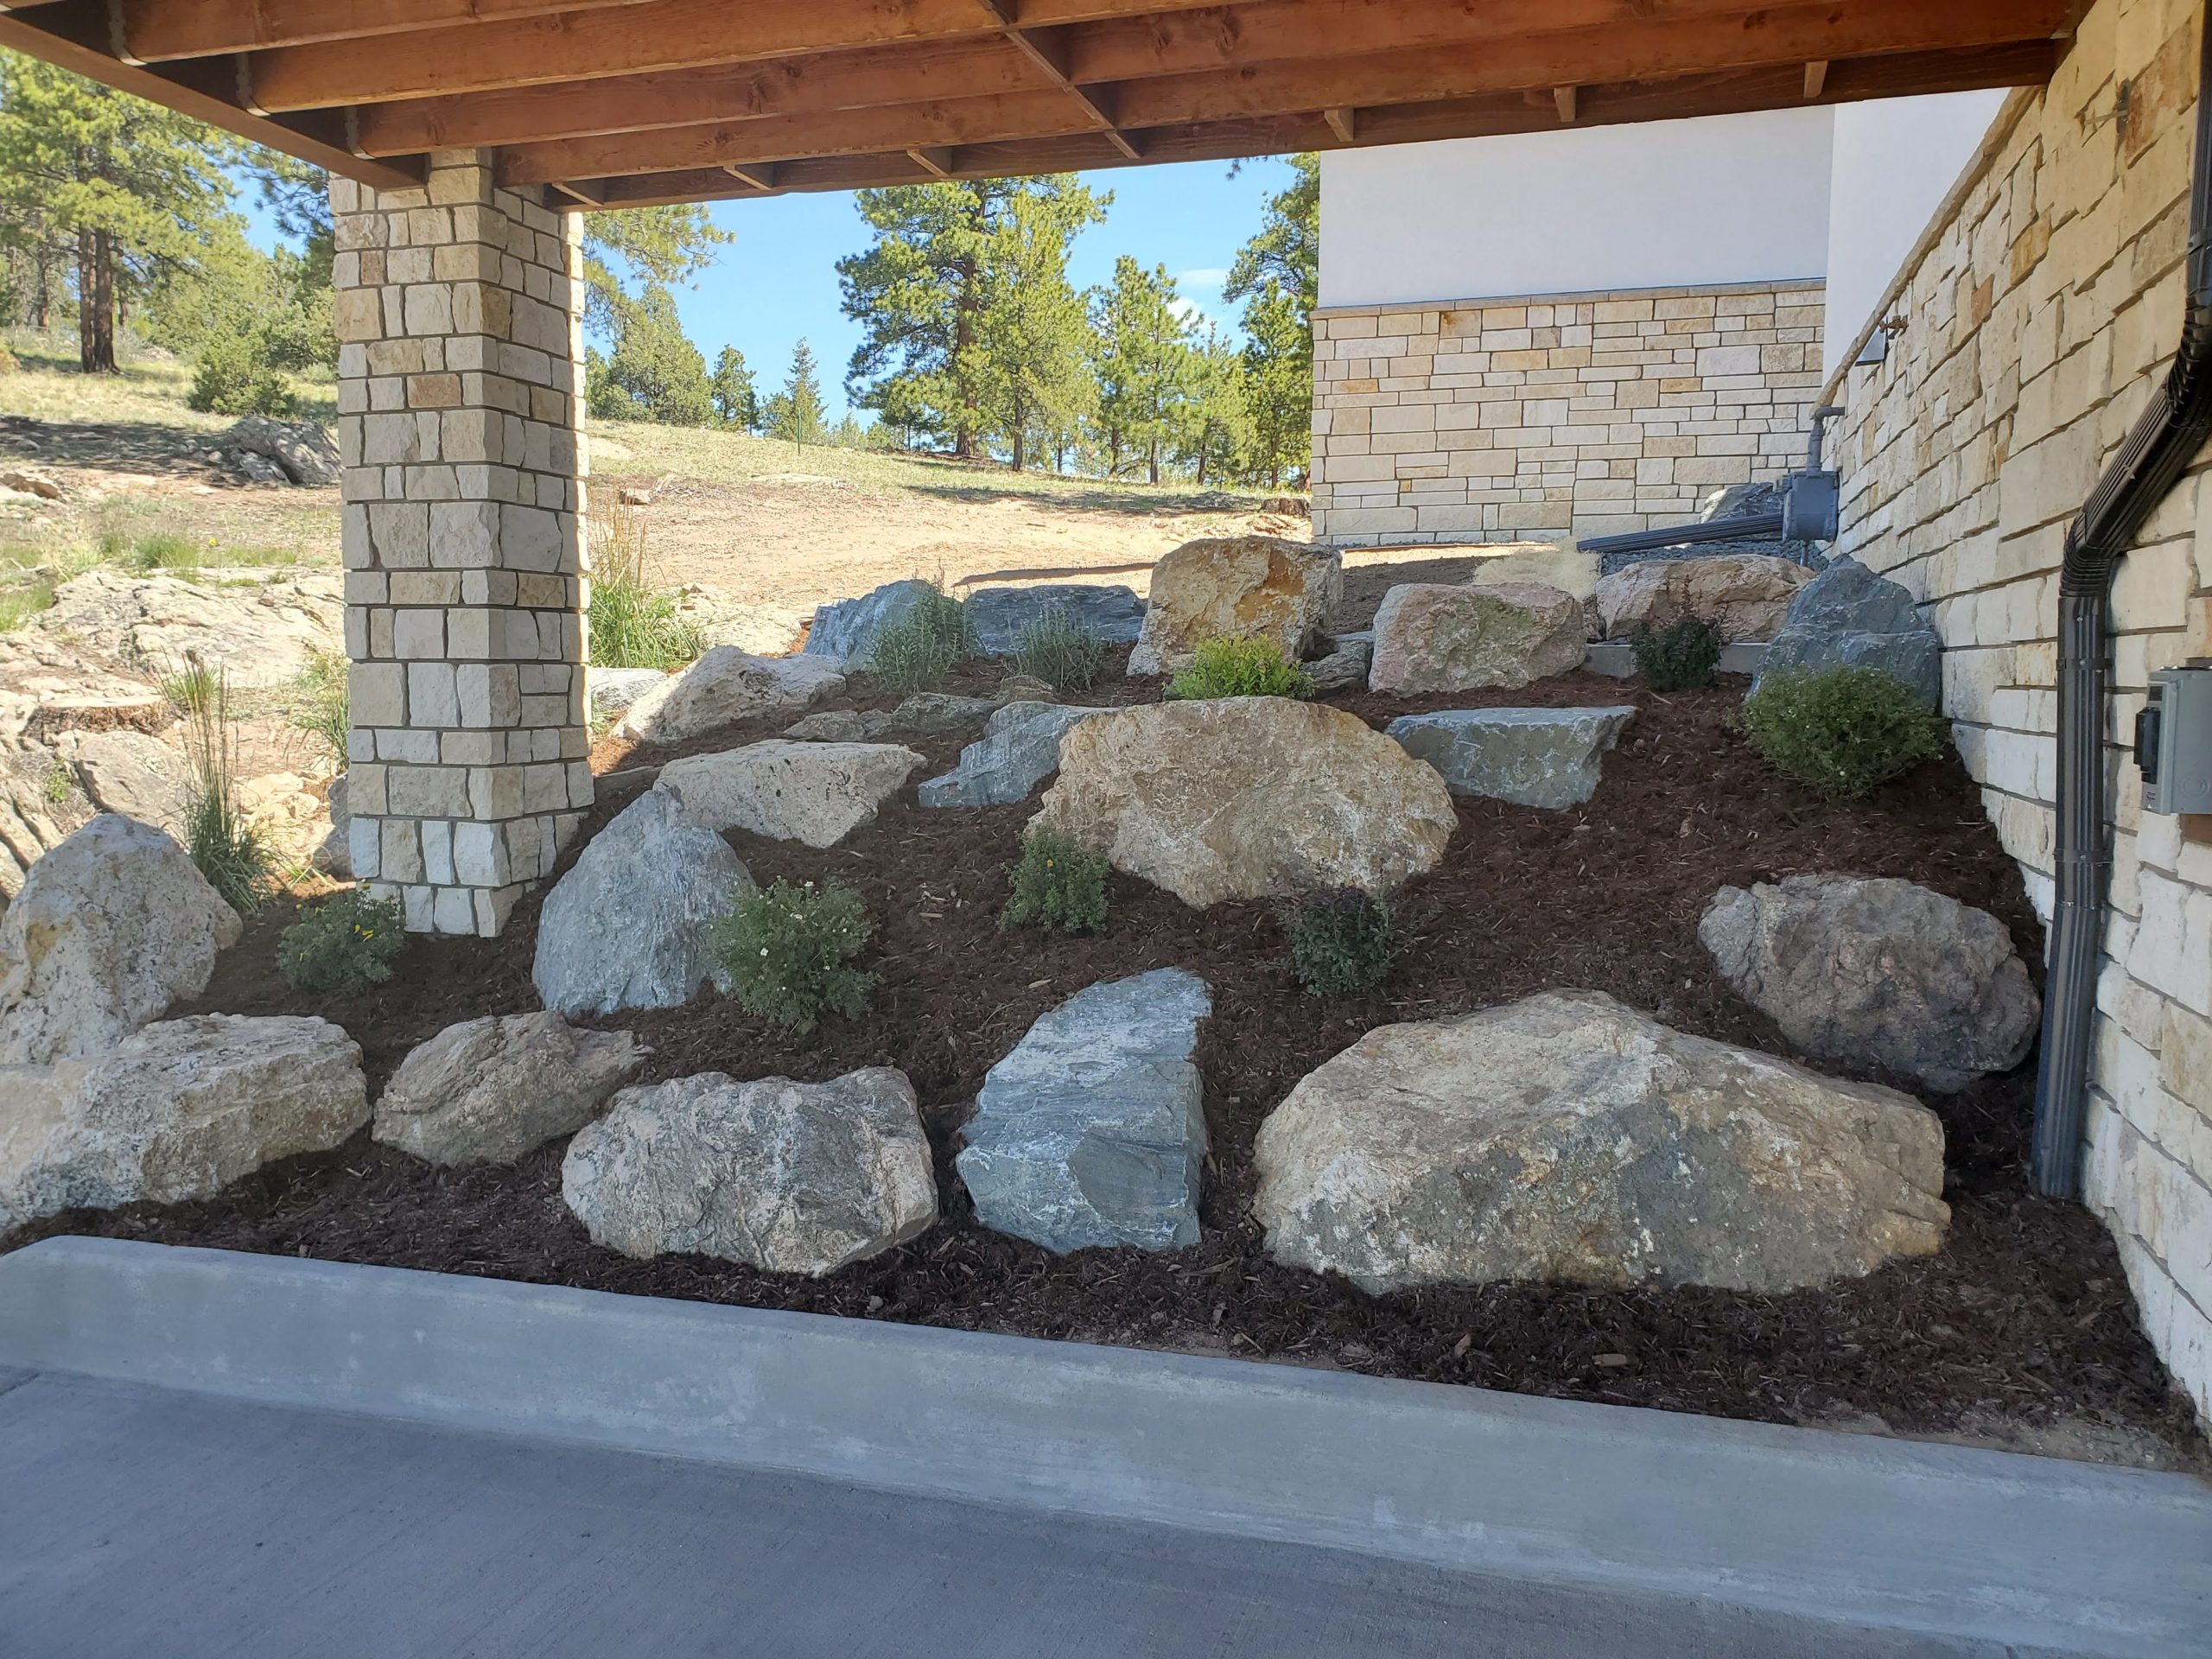 Landscaped hill next to house with large boulders and bushes